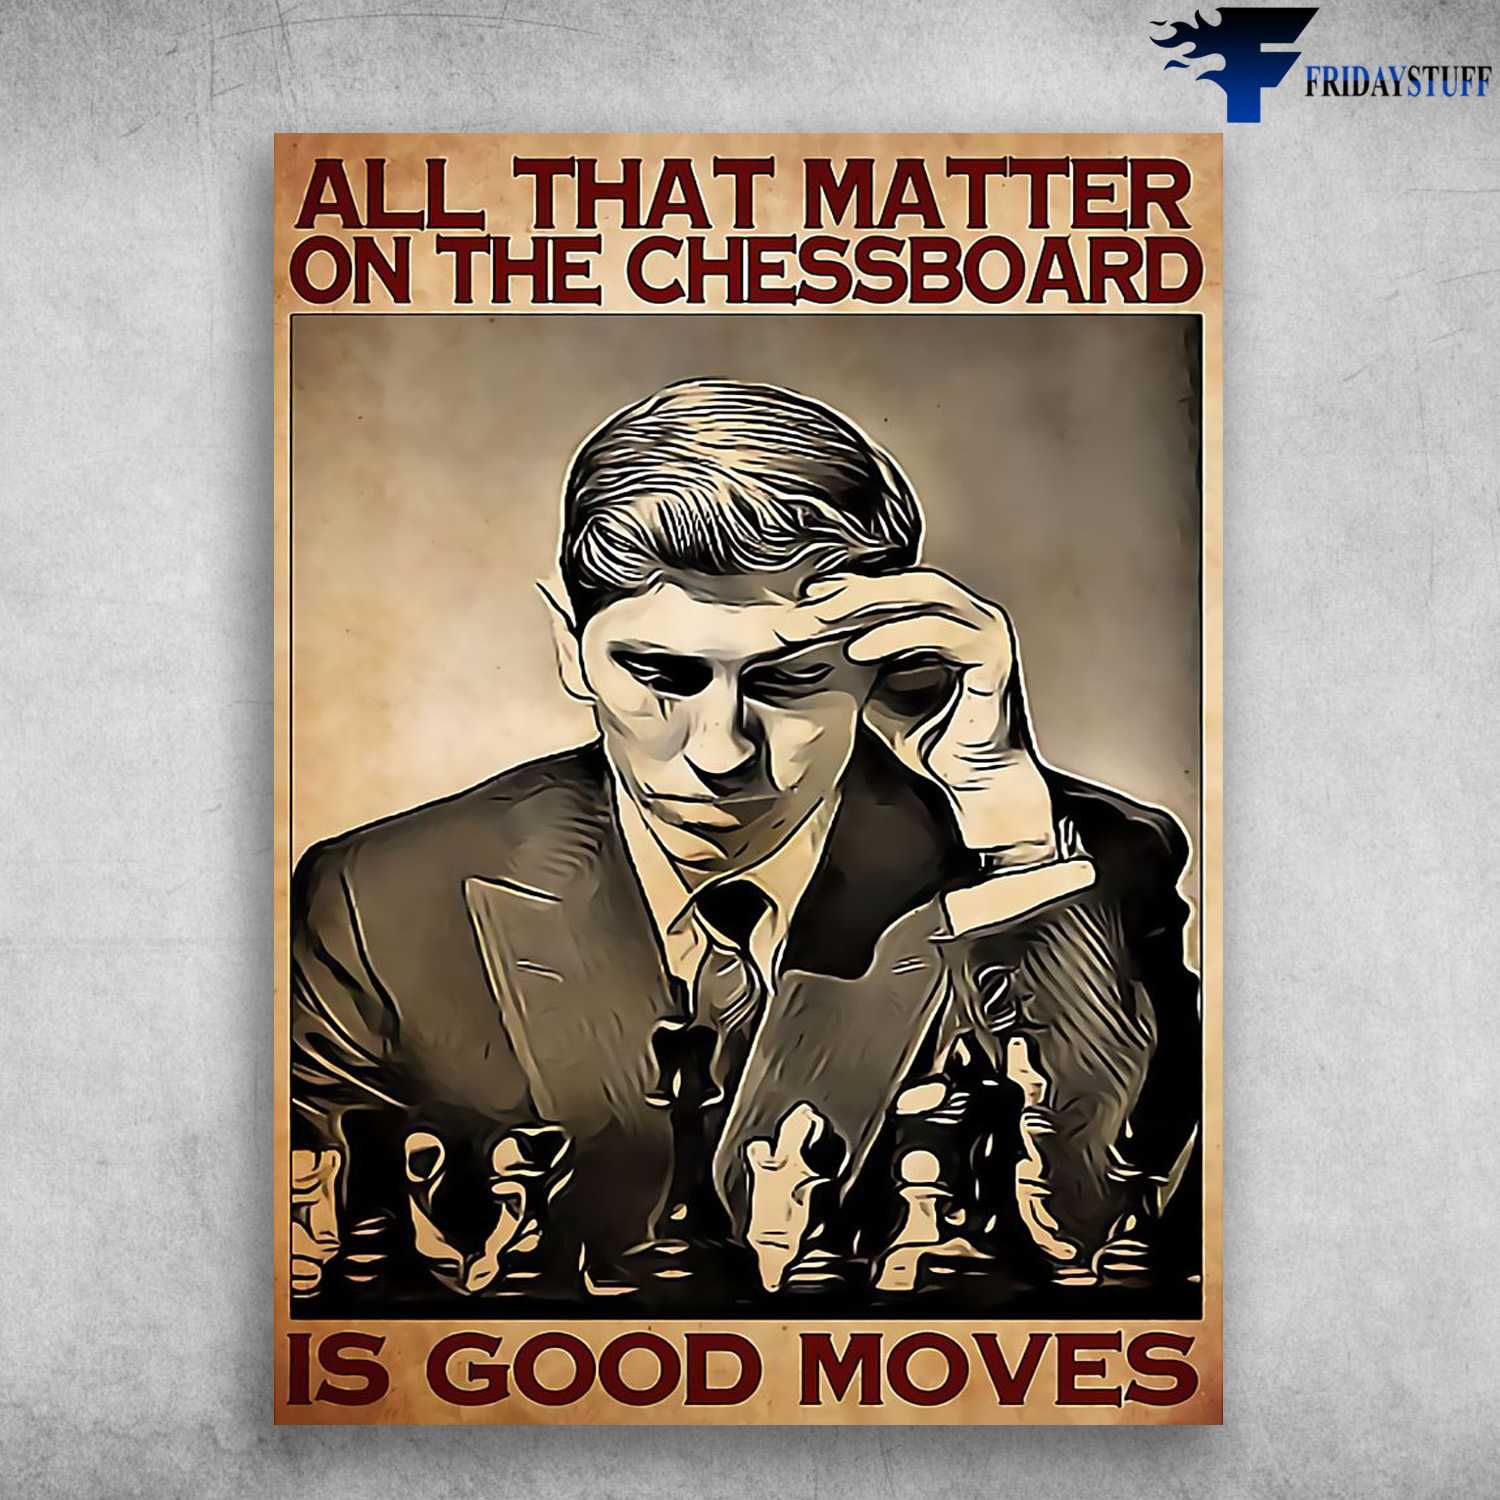 Chess Man, Chess Lover, All That Matter, On The Chessboard, Is Good Moves